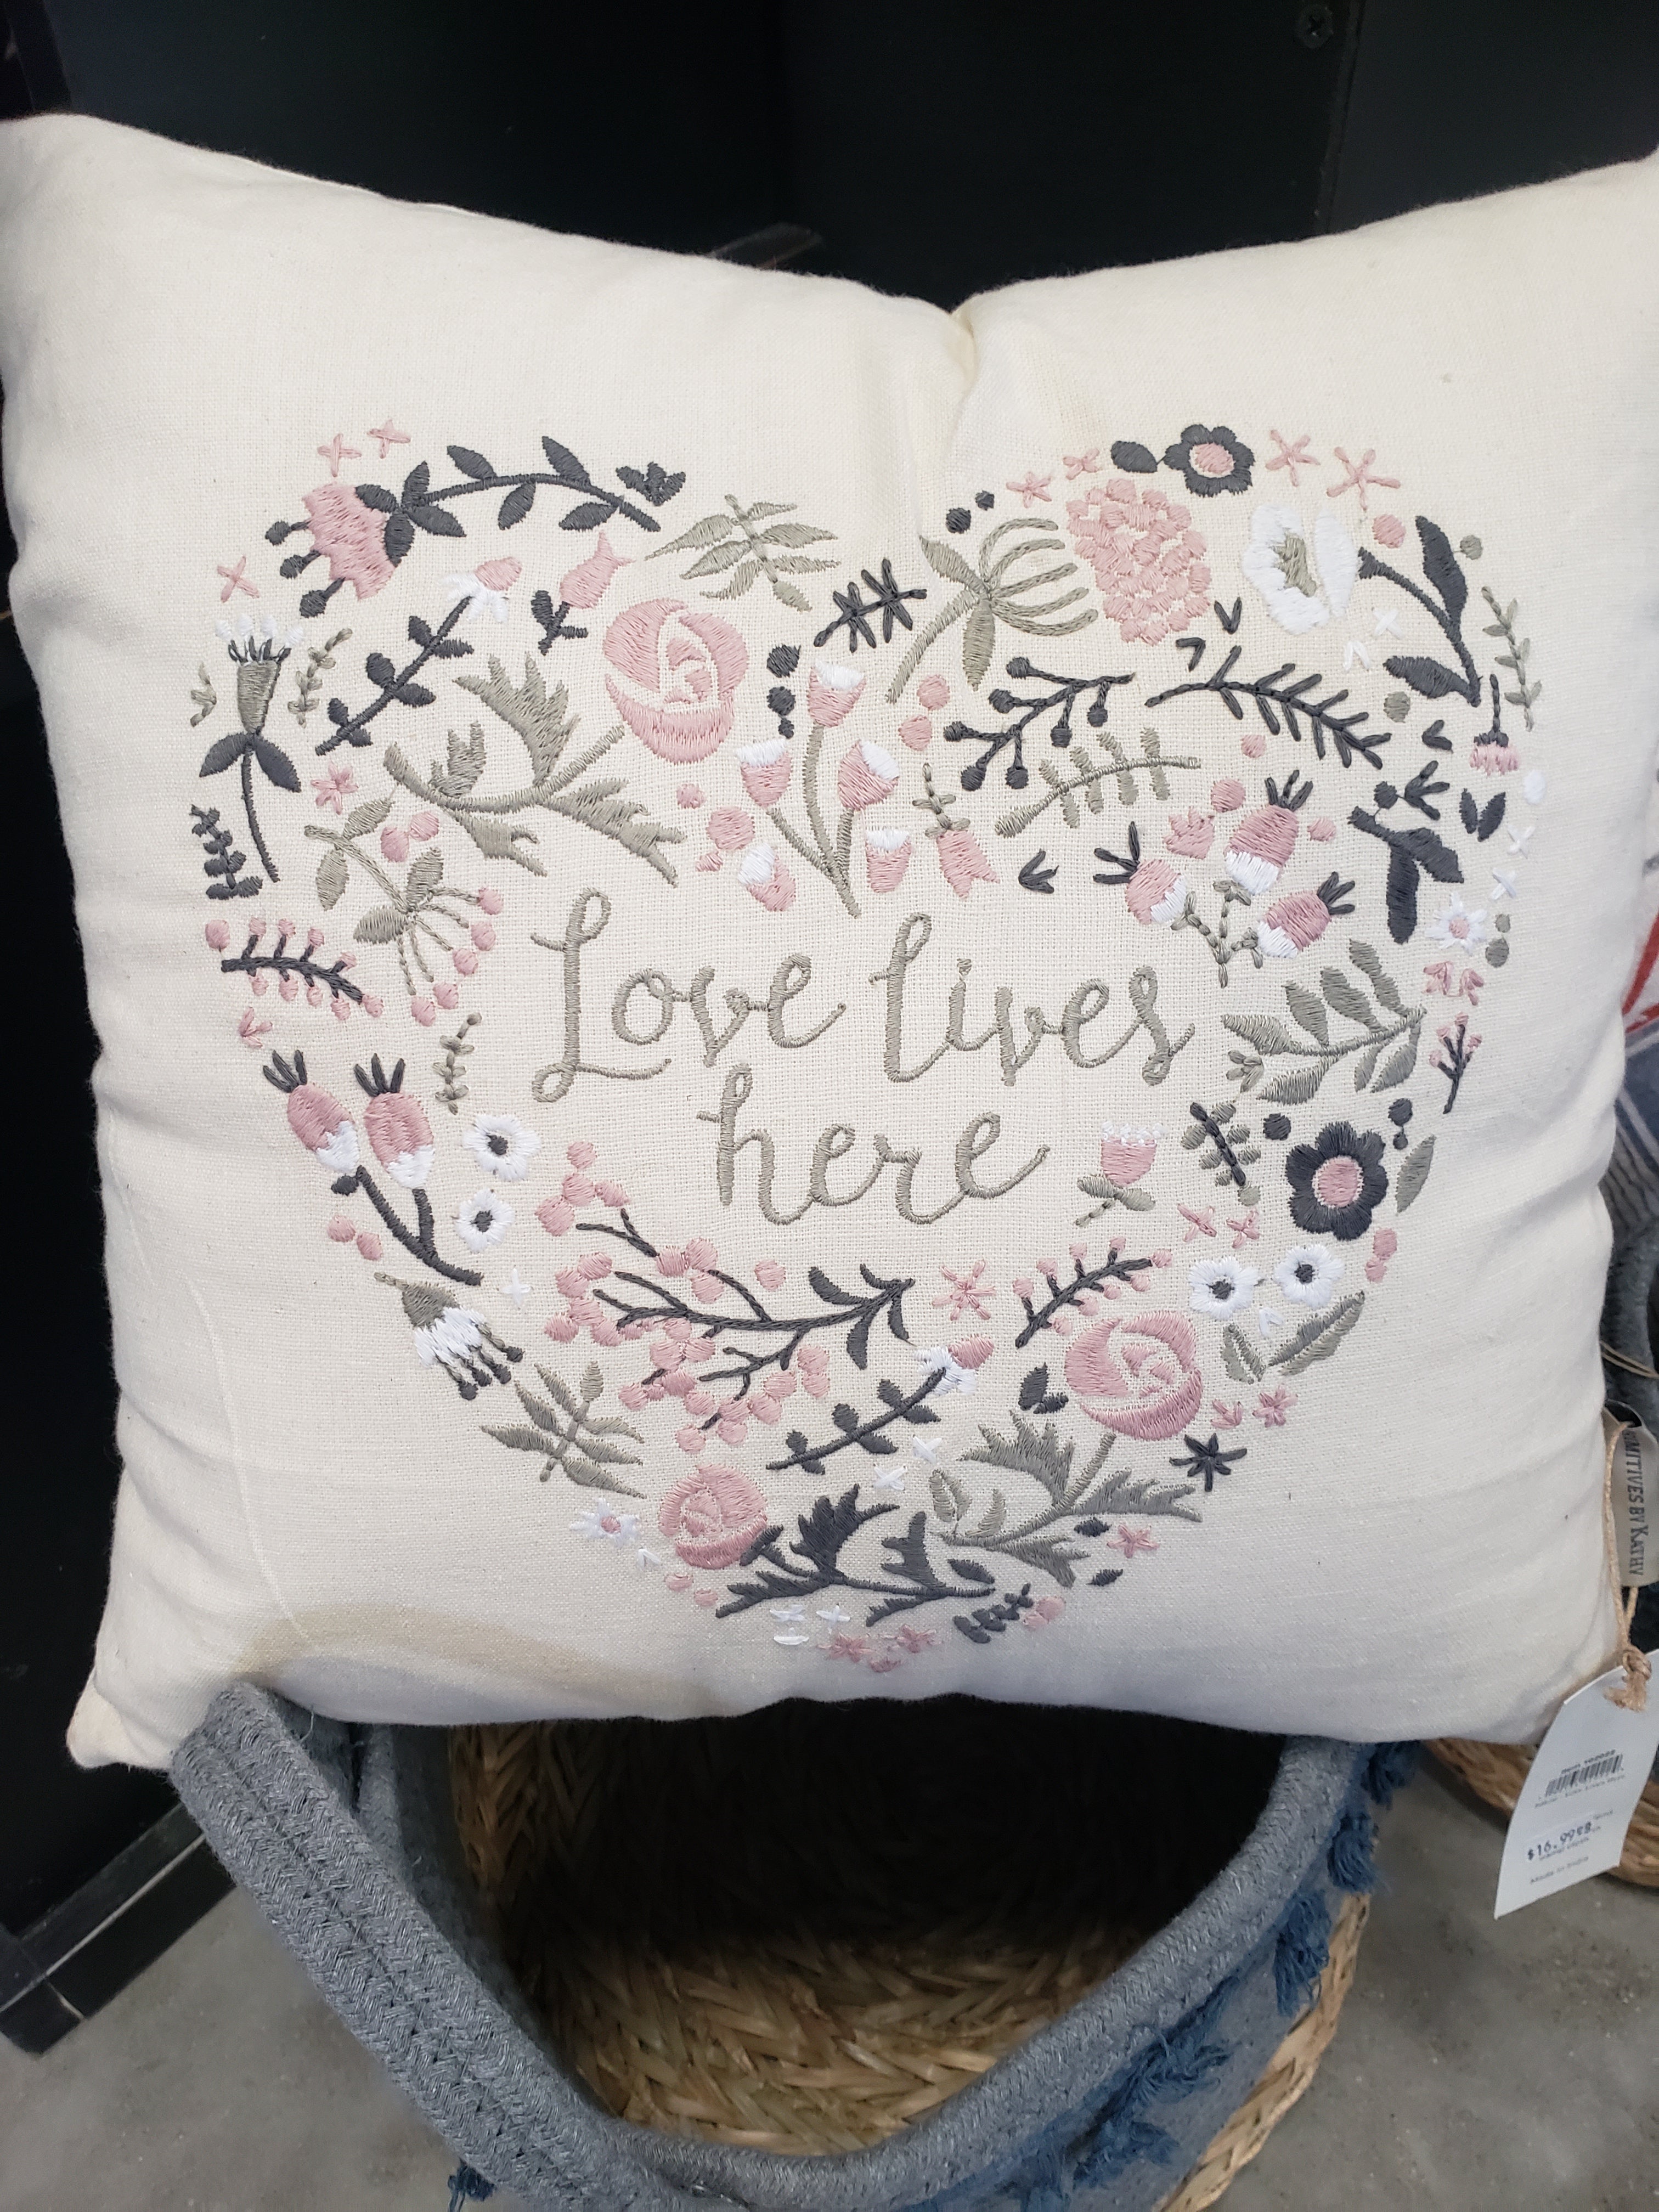 Love lives here pillow